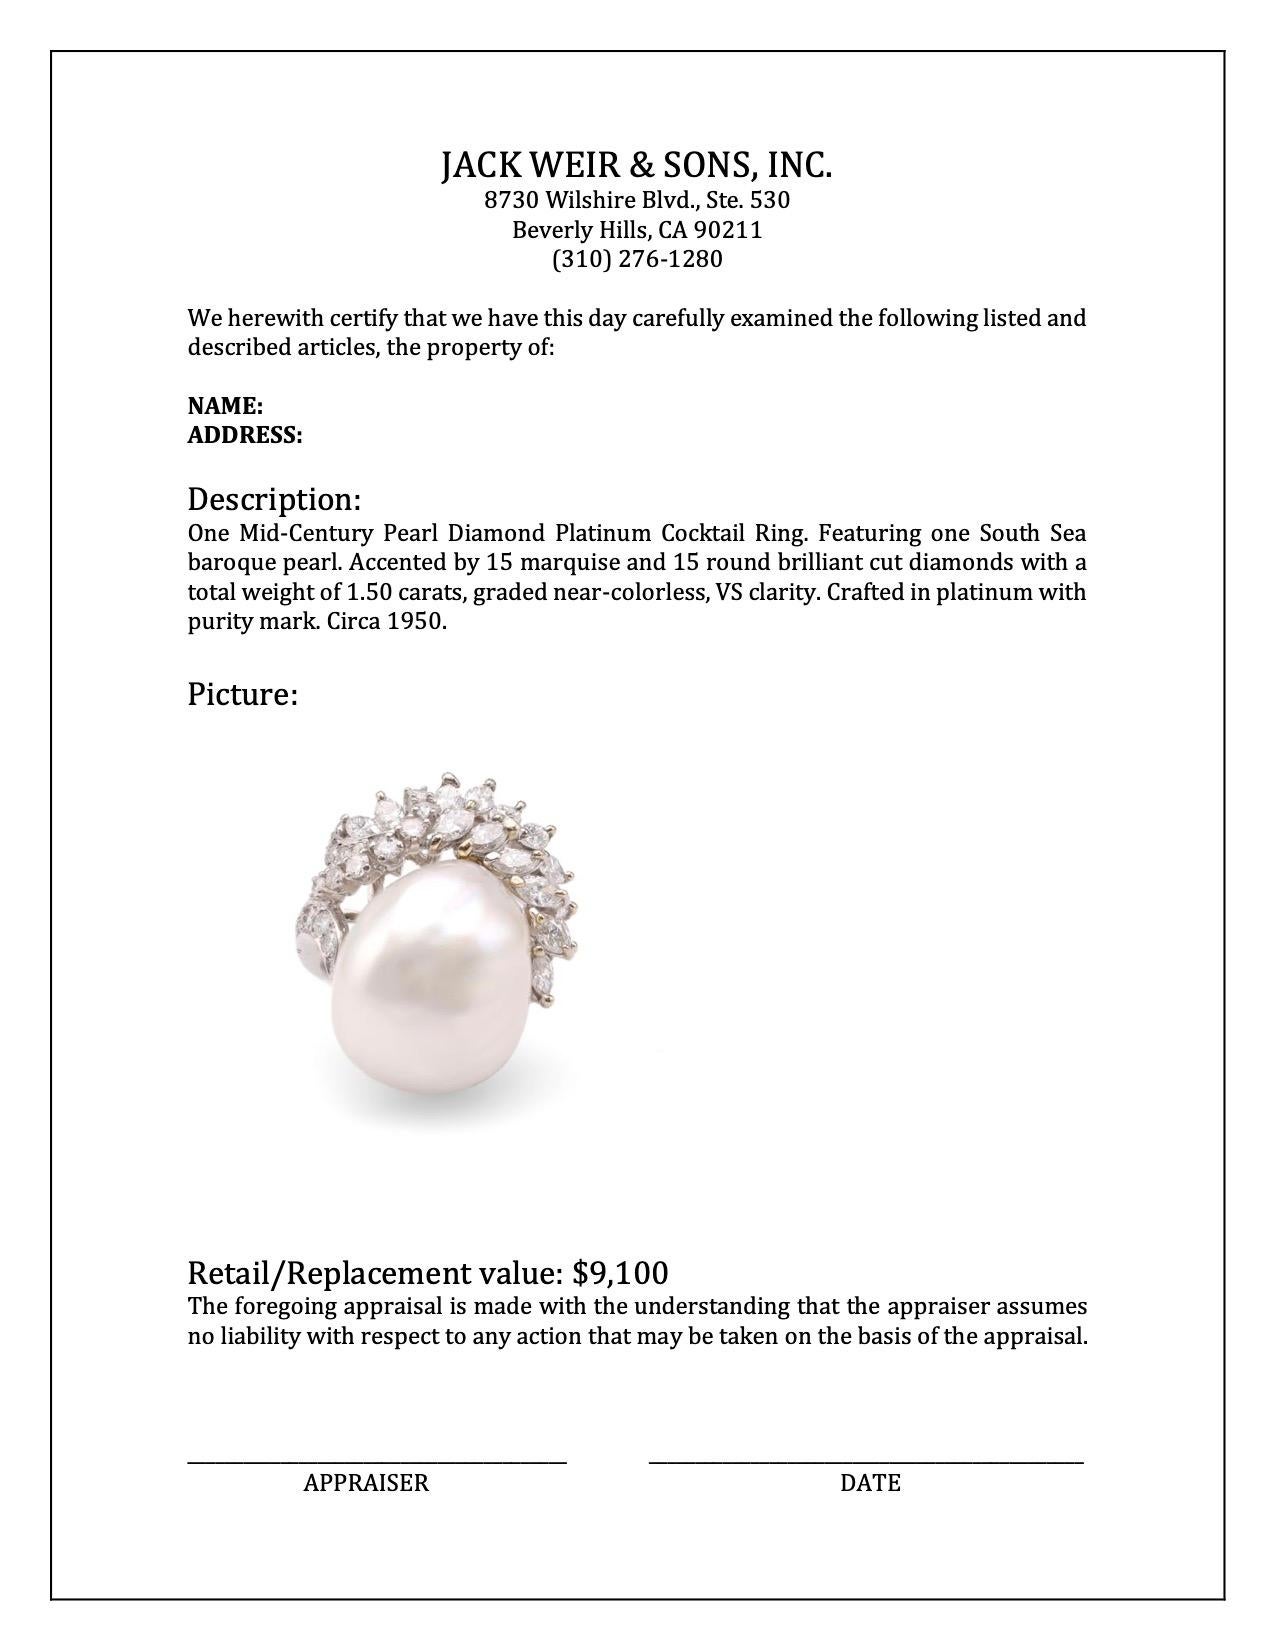 Women's or Men's Mid-Century Pearl Diamond Platinum Cocktail Ring For Sale